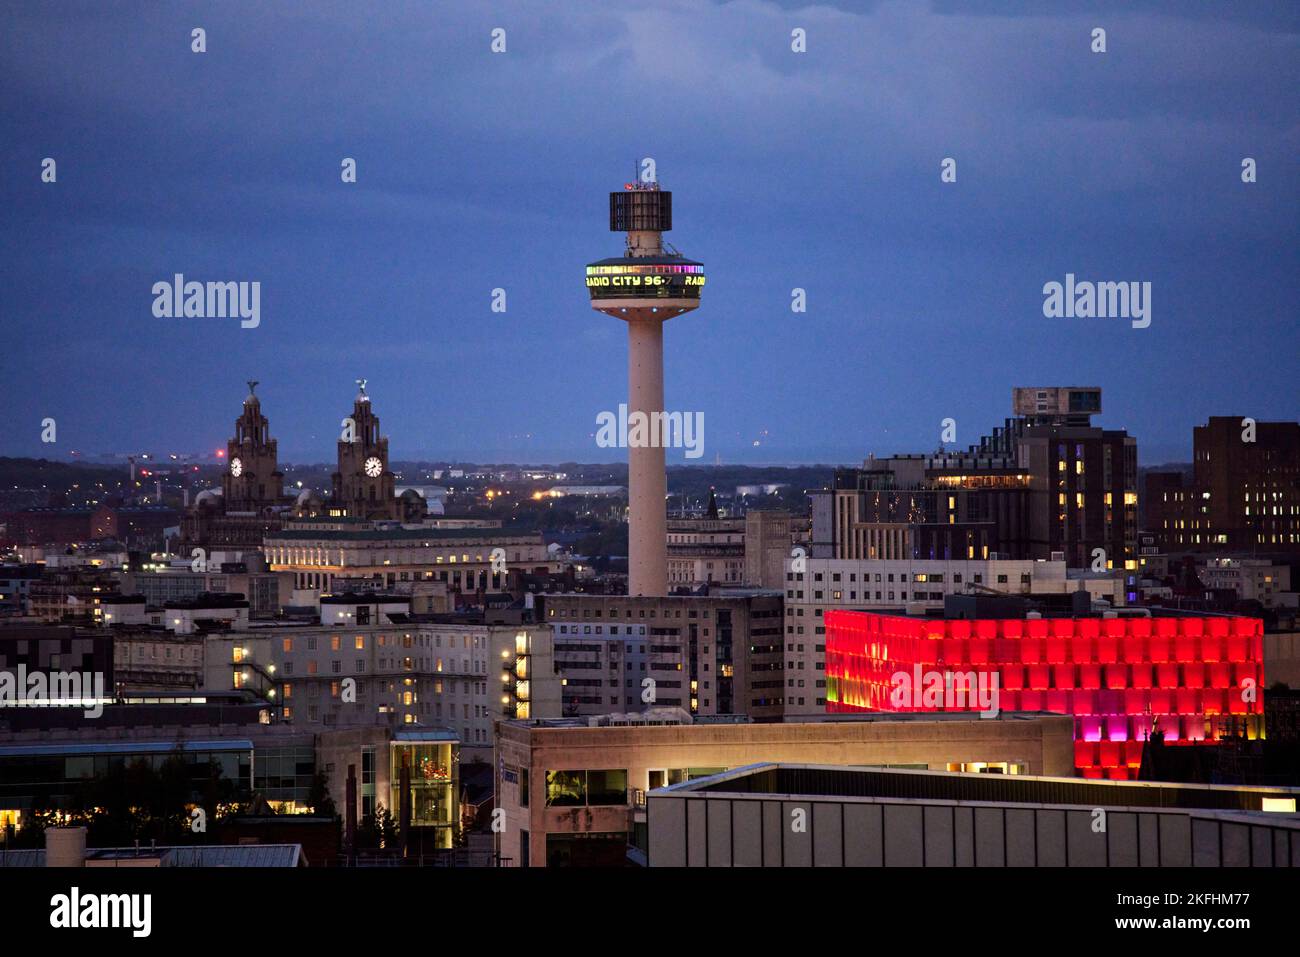 Liverpool skyline Liver building and Radio City, St Johns Beacon Viewing Gallery Stock Photo